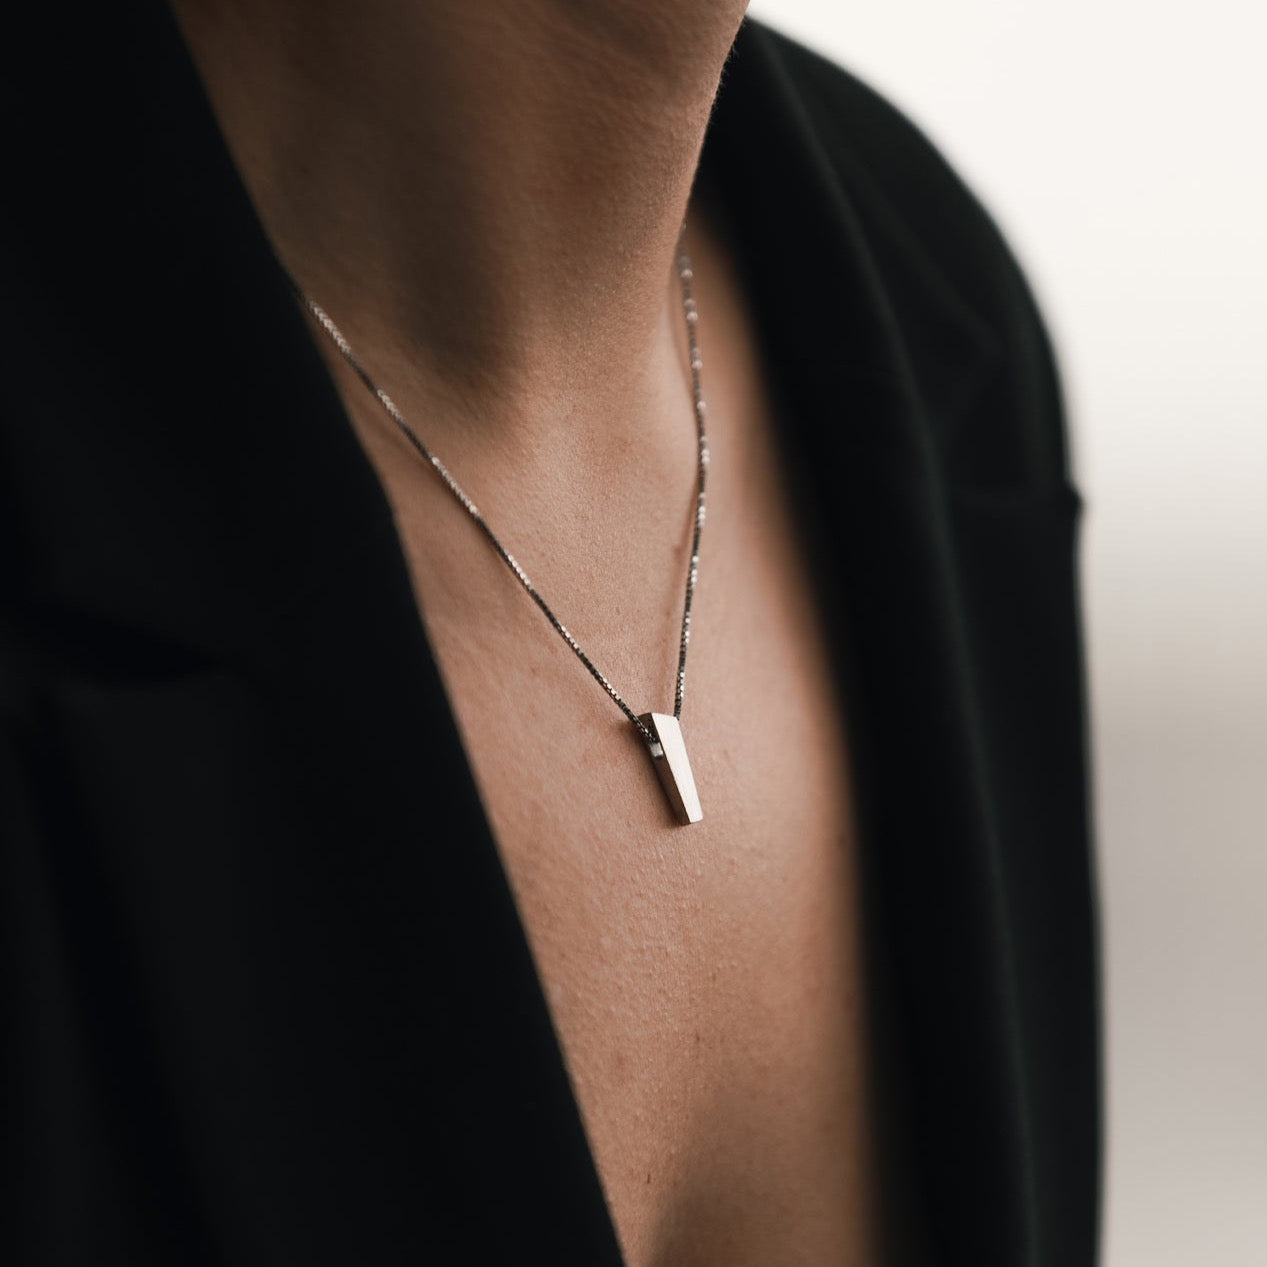 Minimalist silver pendant inspired by the Norwegian scenery